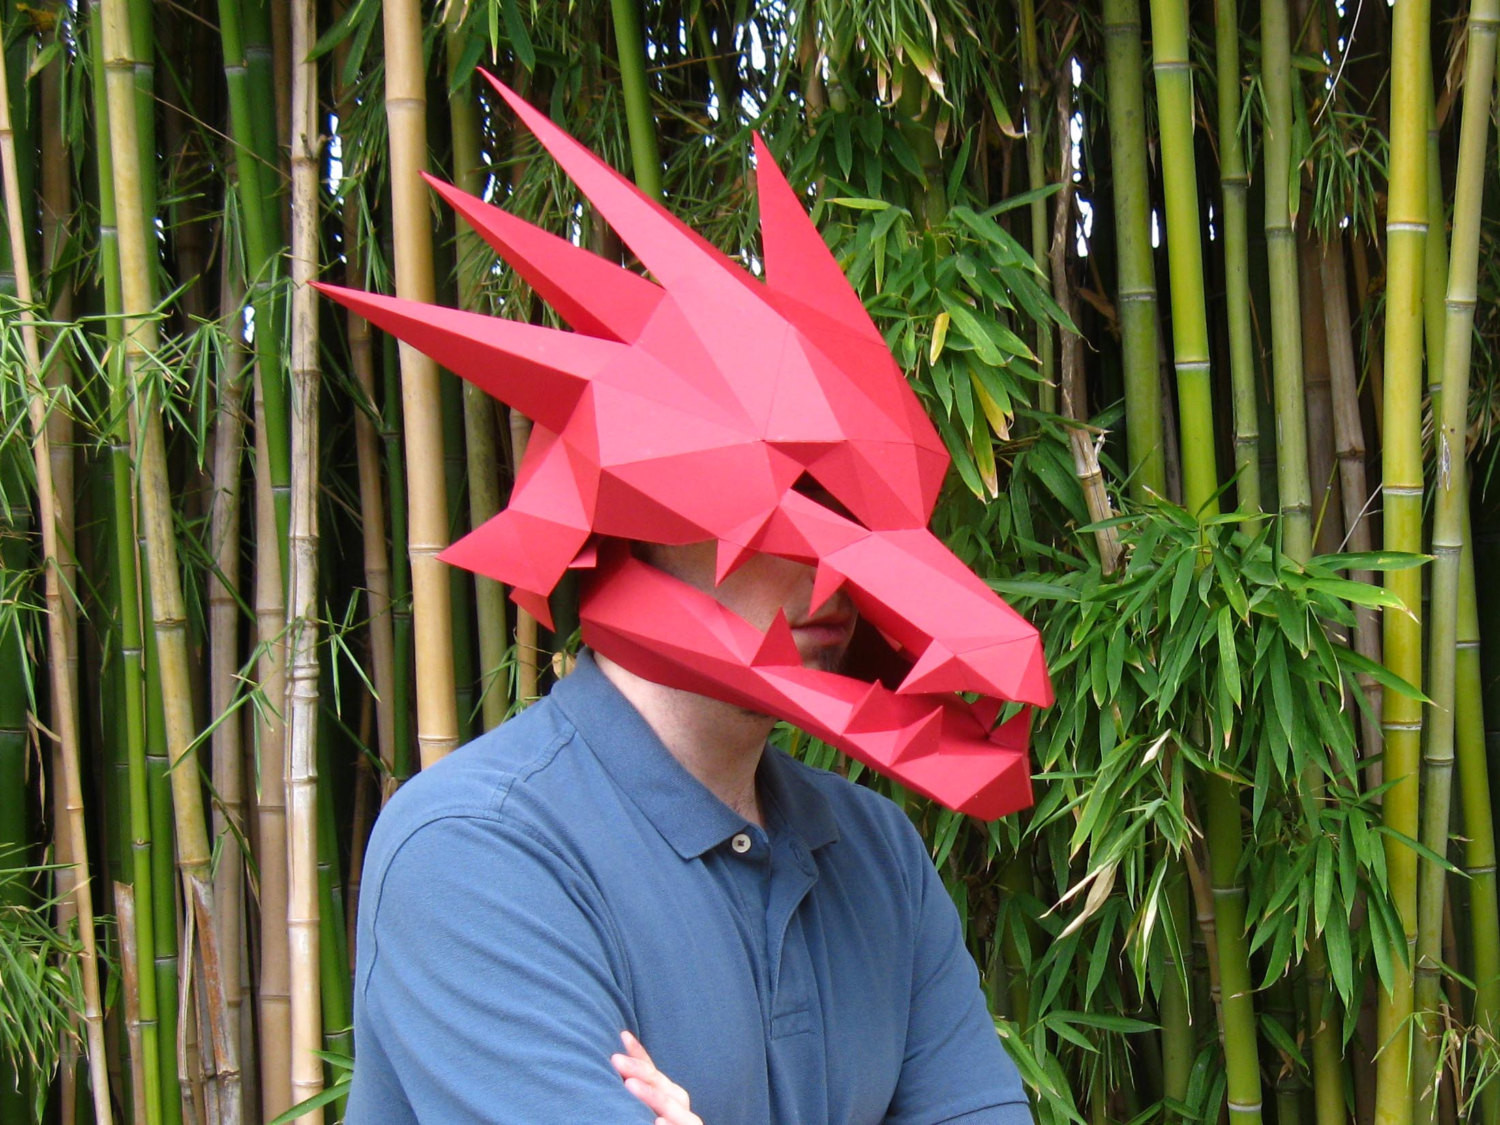 DIY Dragon Mask
 DIY Dragon Mask with Moving Jaw Awesome Rave Costume